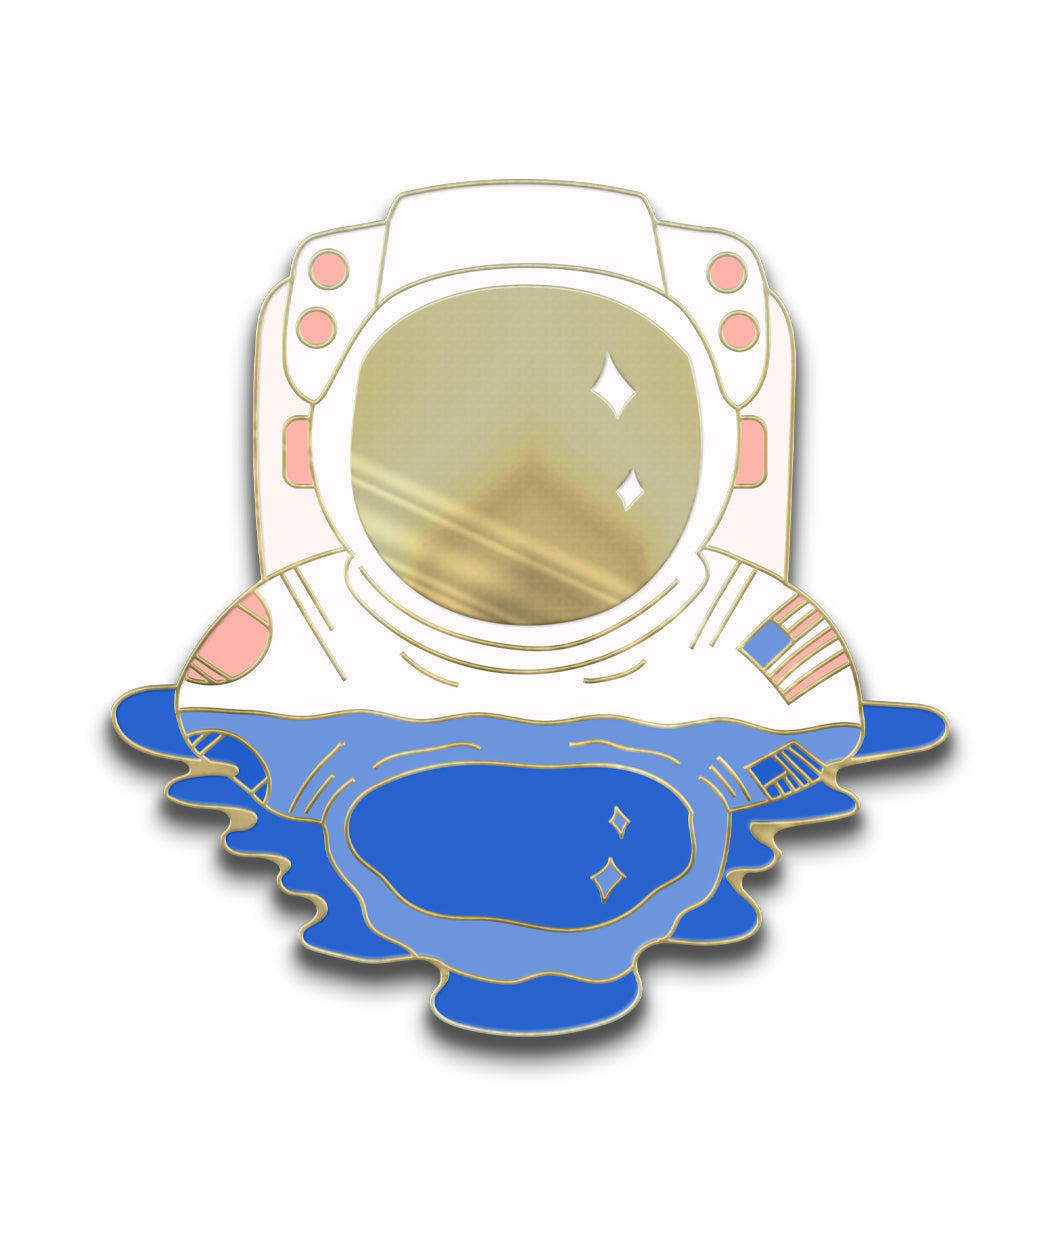 Mock up of a pin with gold enamel plating. Design is of an astronaut with a gold reflective helmet. Astronaut looks like it is coming out of a reflective pool of water. Shoulders and above are visible. 